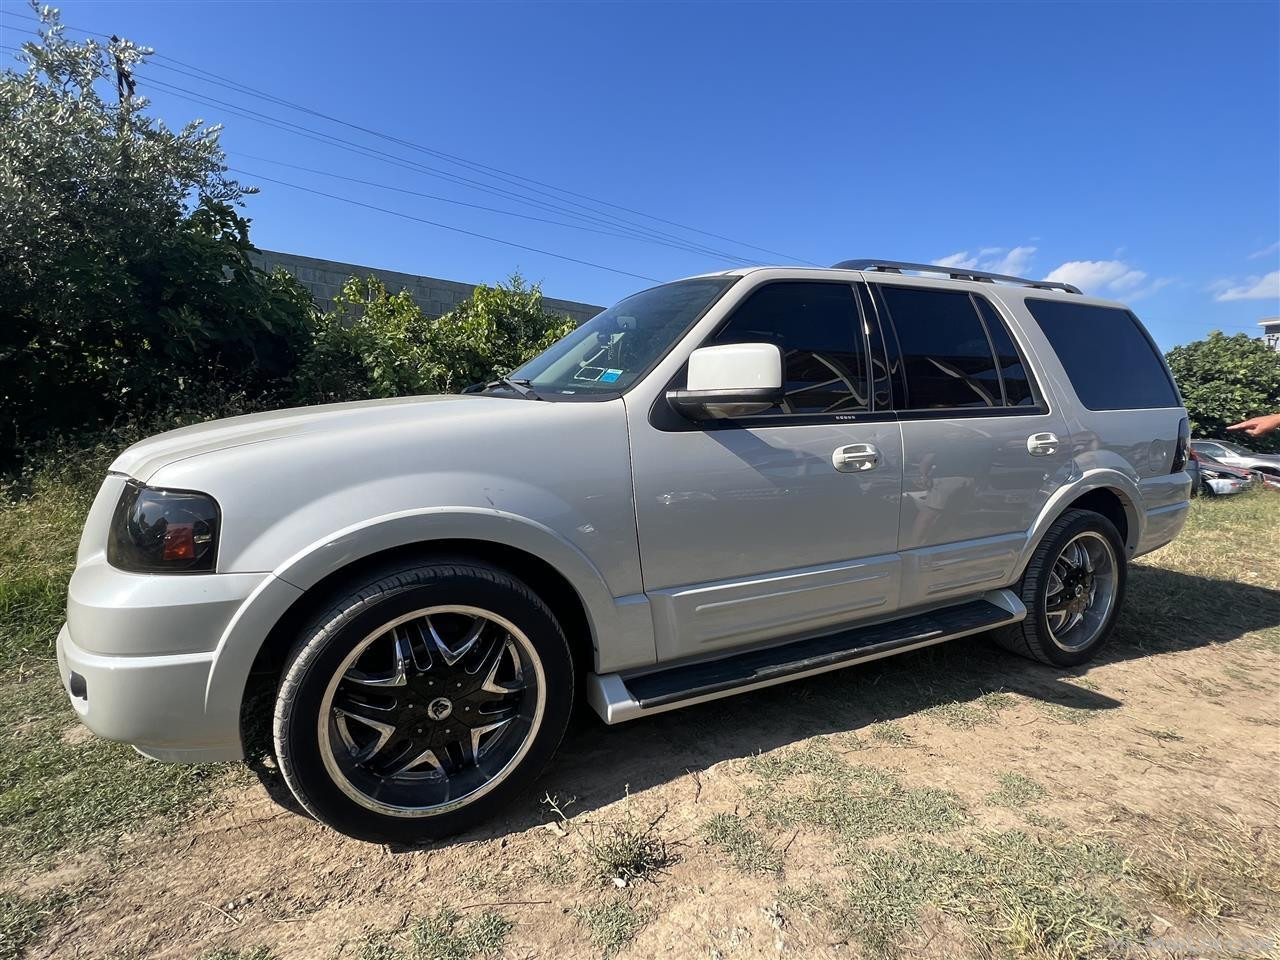 Pjese per Ford Expedition 